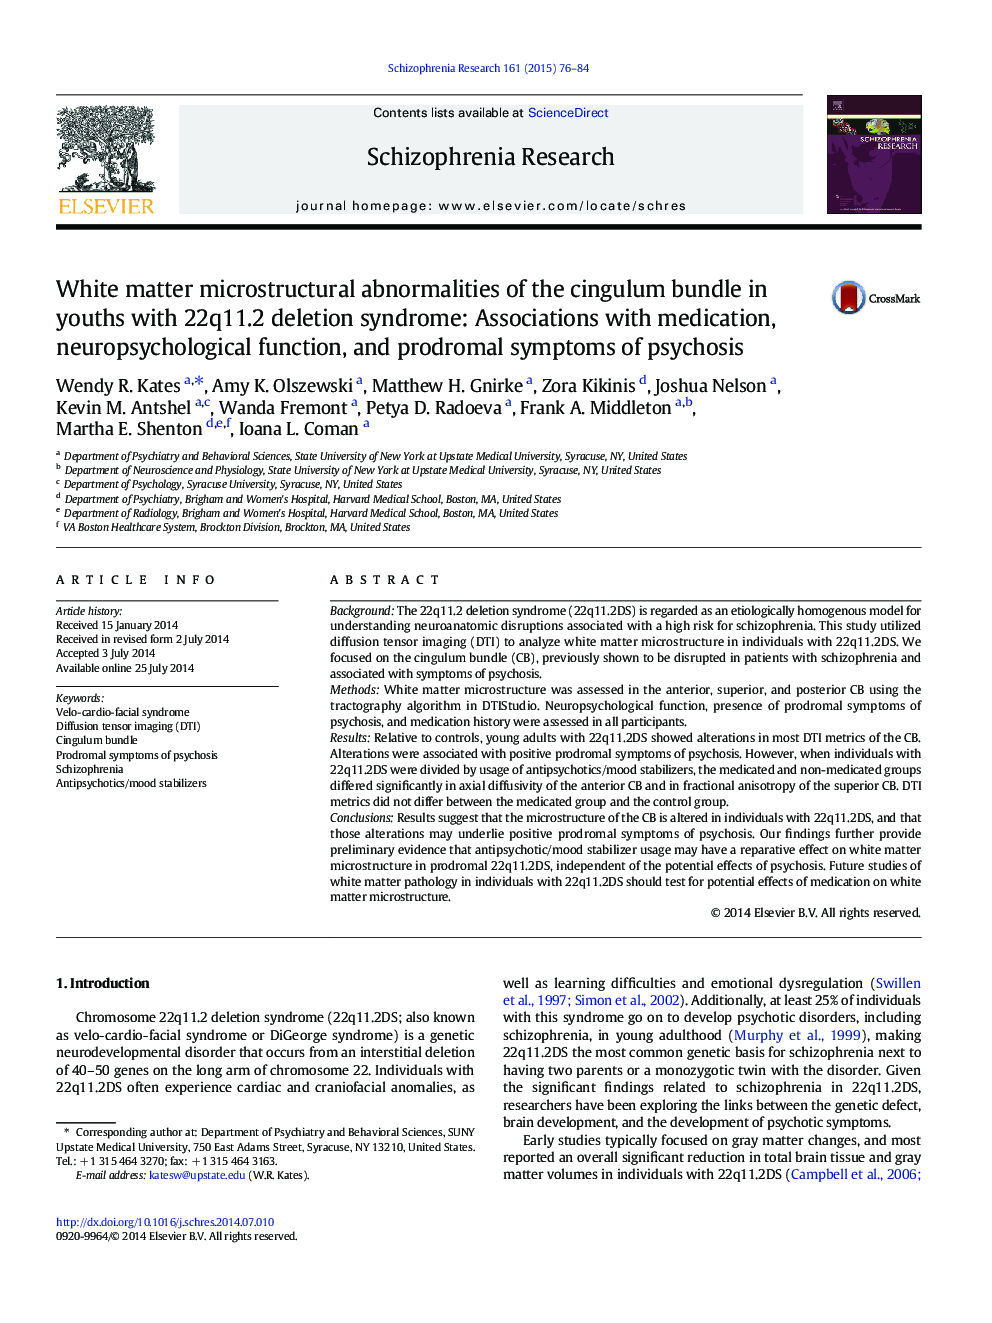 White matter microstructural abnormalities of the cingulum bundle in youths with 22q11.2 deletion syndrome: Associations with medication, neuropsychological function, and prodromal symptoms of psychosis